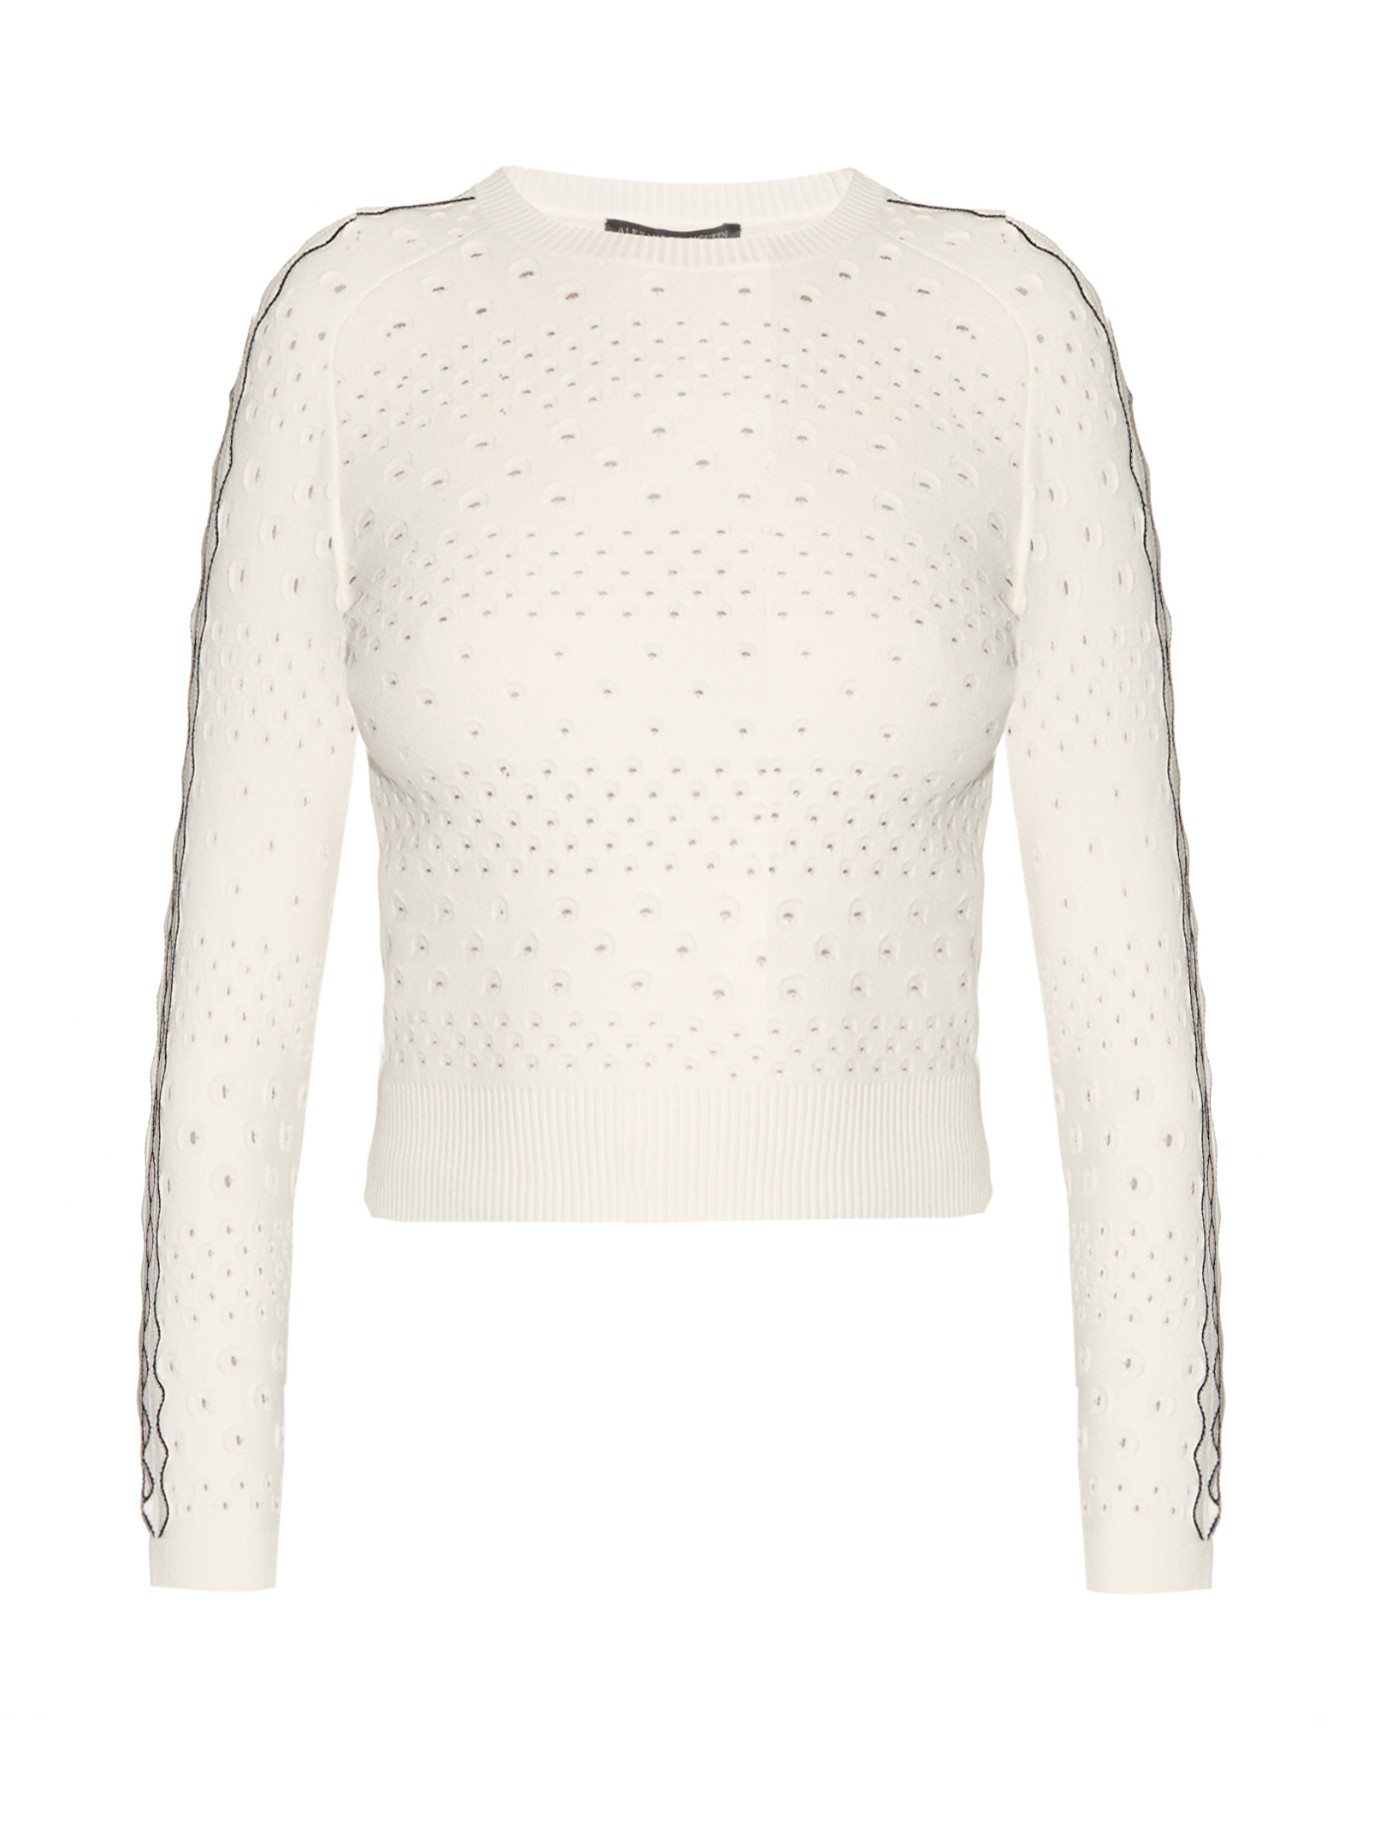 Alexander mcqueen Lace-knit Cropped Sweater in White | Lyst